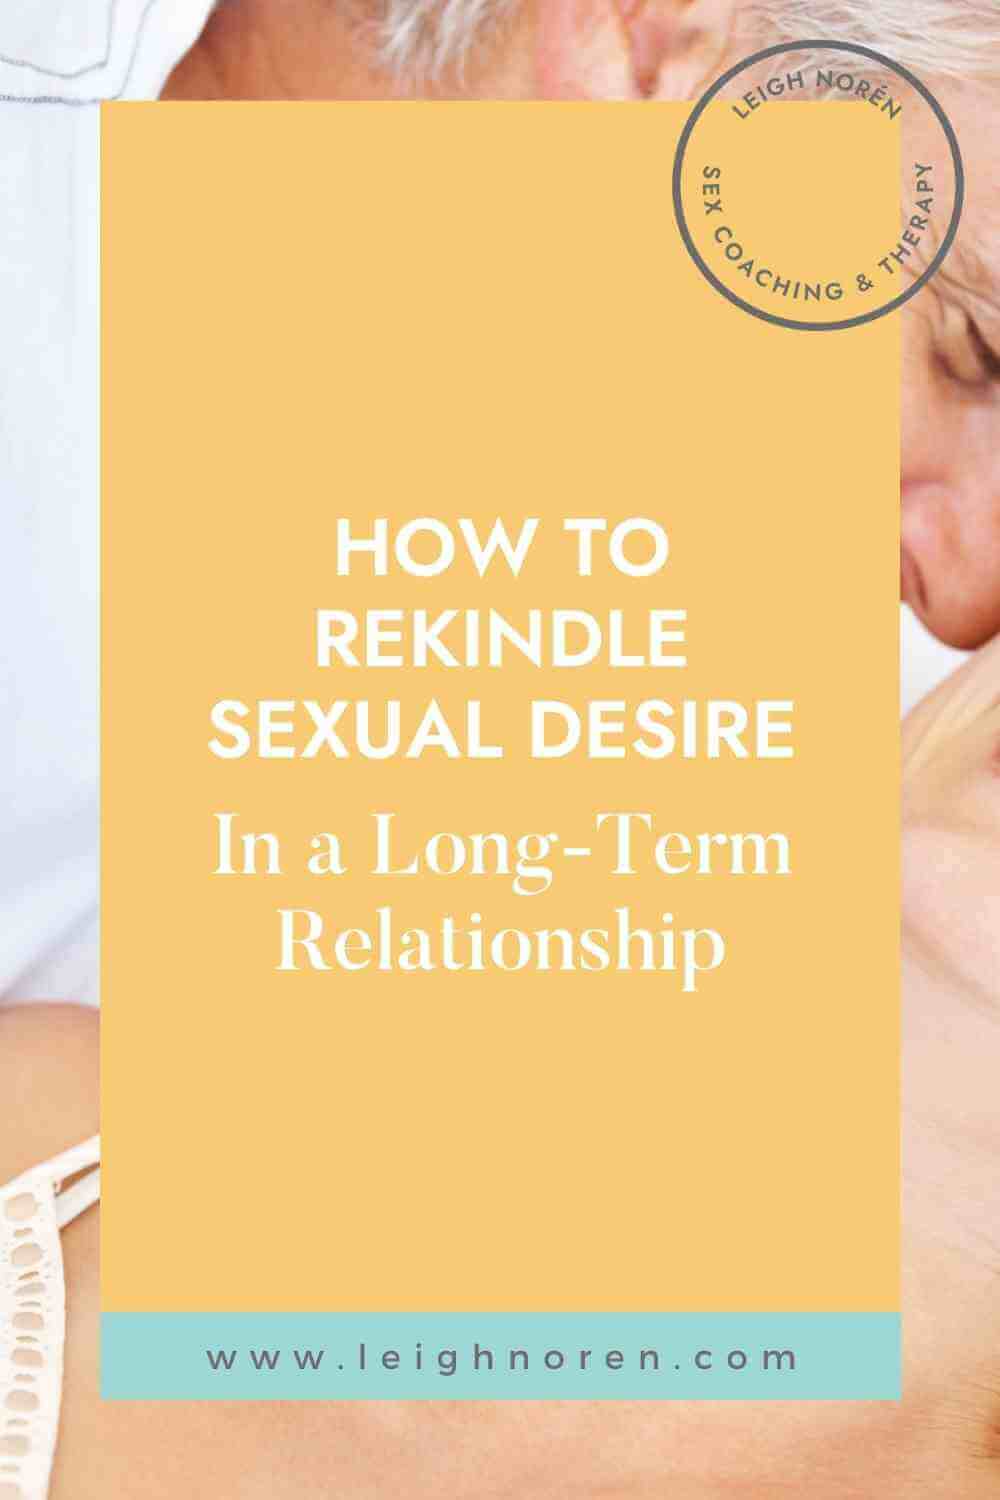 How to Rekindle Sexual Desire in a Long-Term Relationship